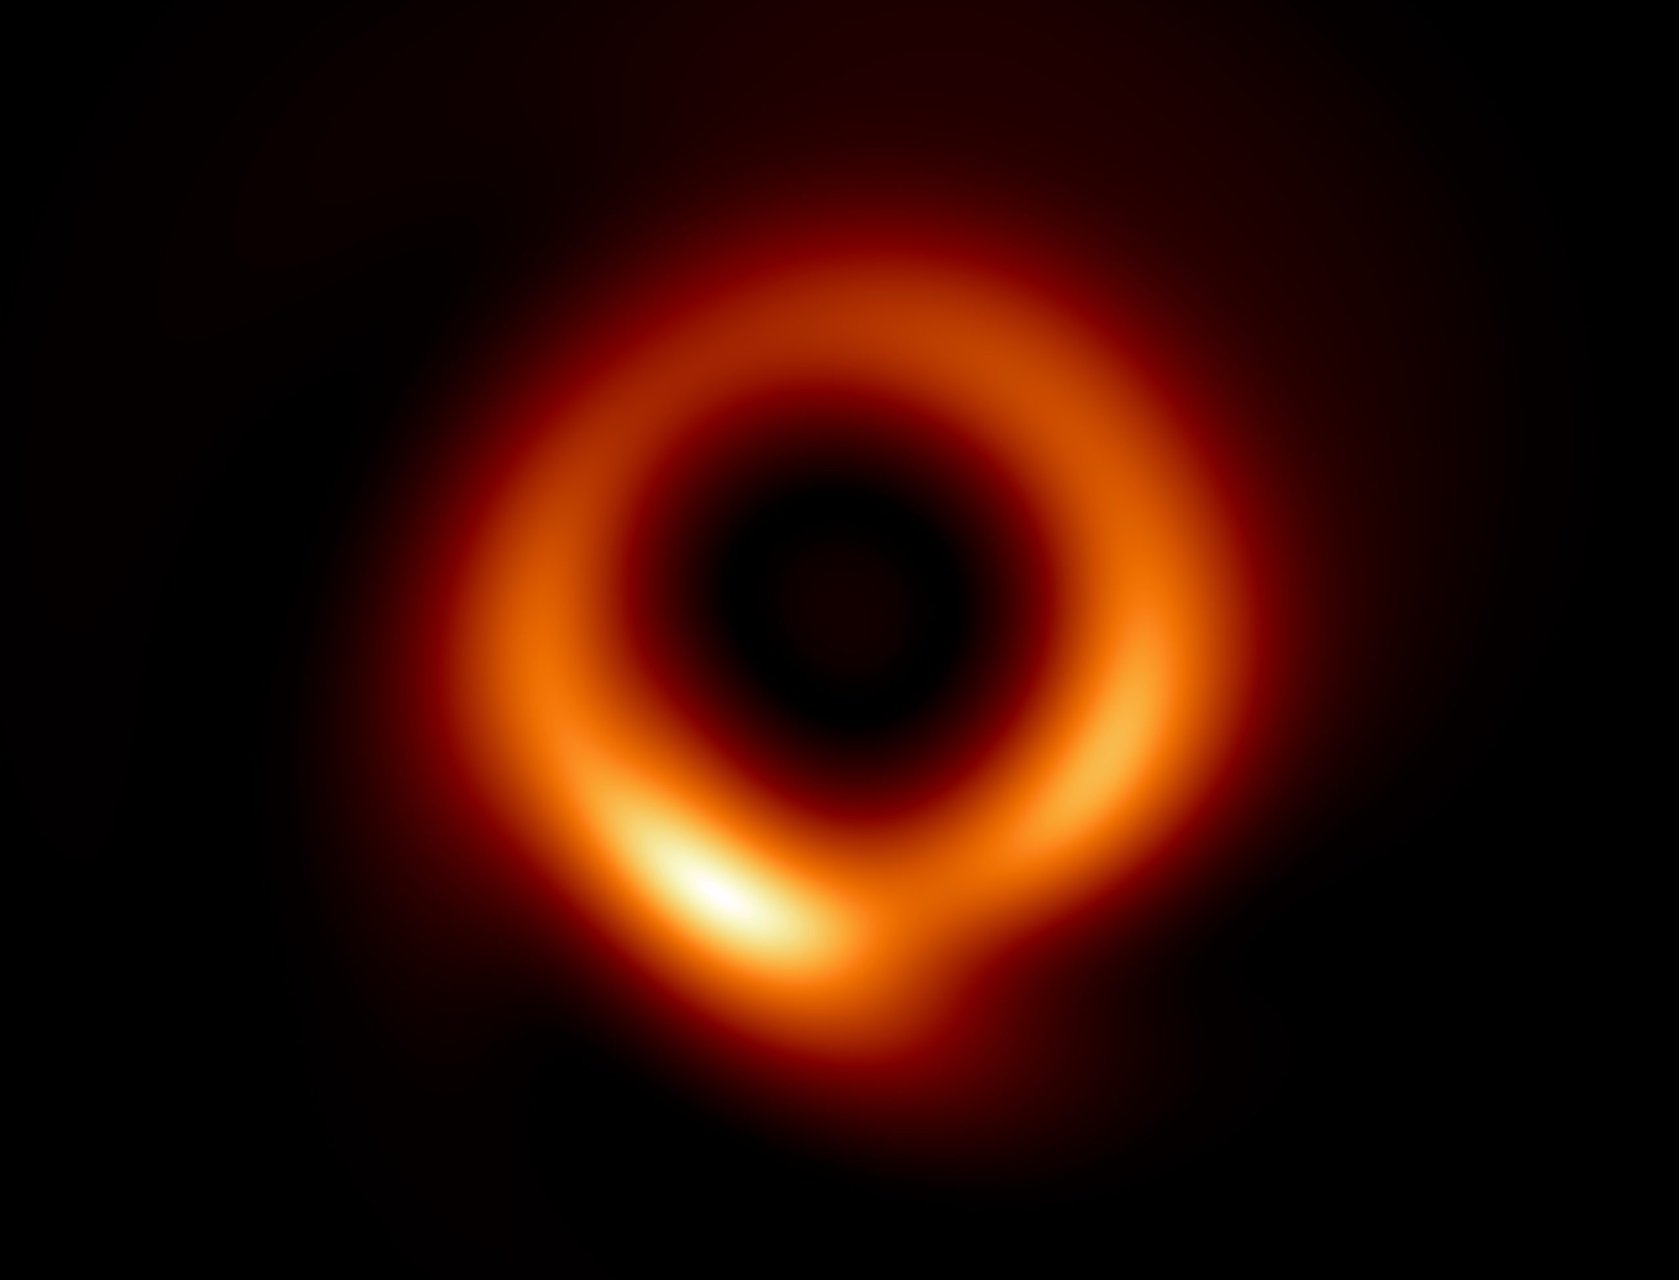 A blurry donut revealing a fiery ring in a clearer image of the black hole